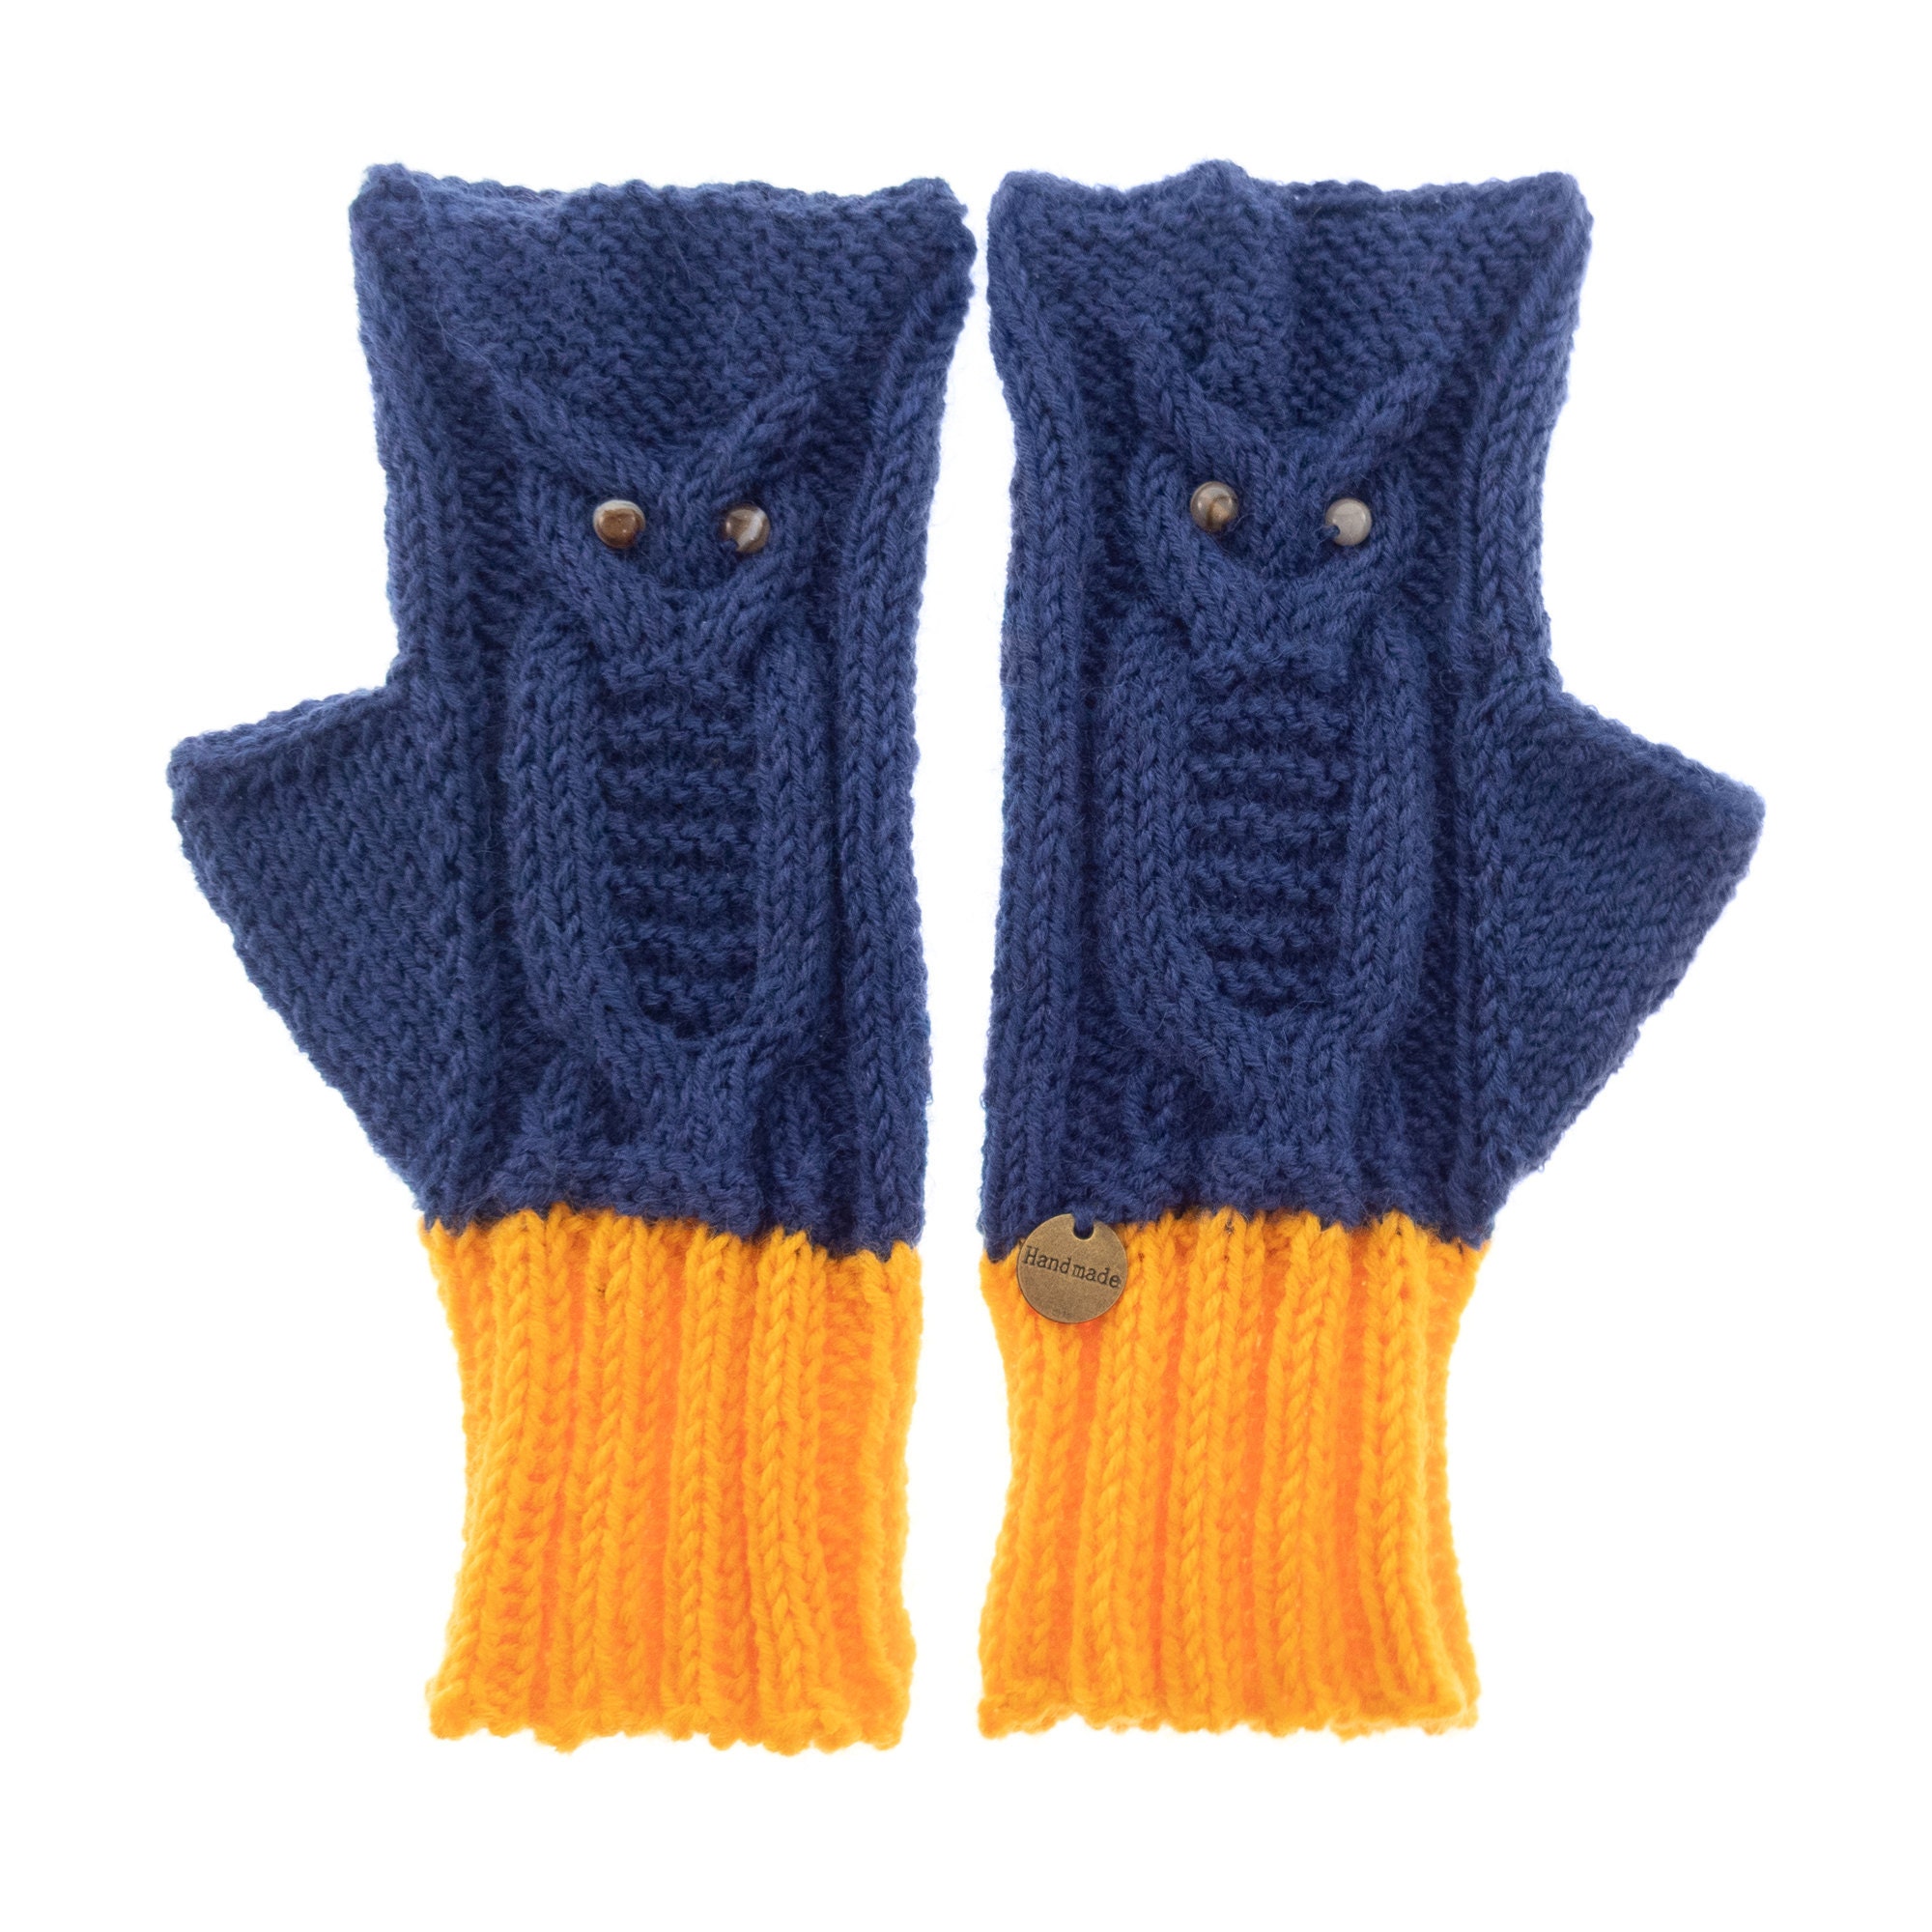 Owl Mitts, Texting Mittens Fingerless Gloves